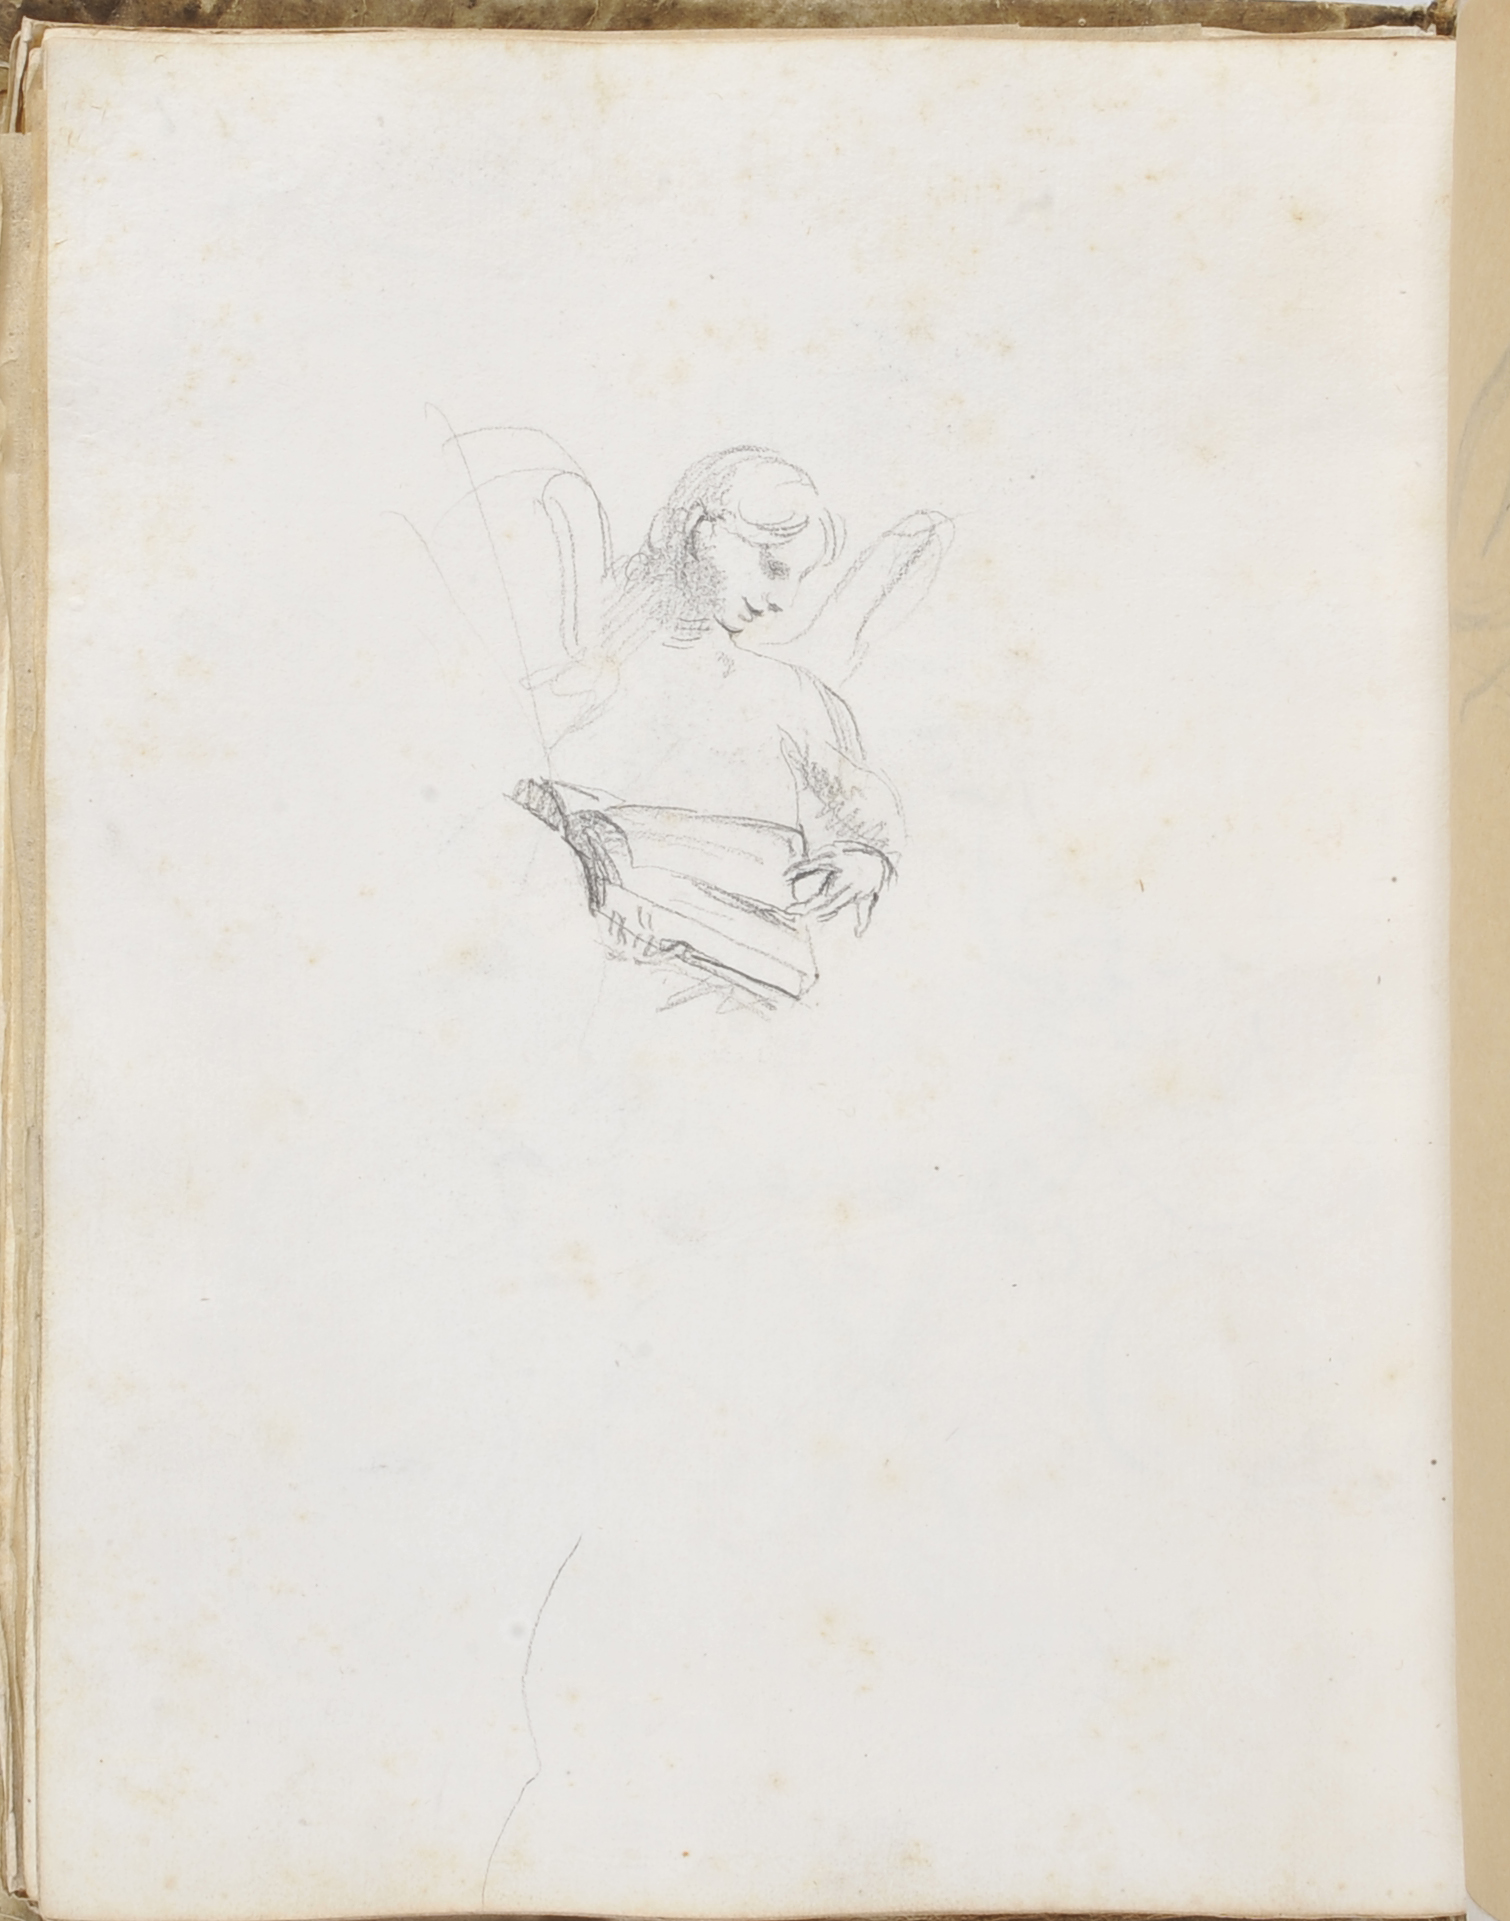 Reynolds Sketchbook (PLYMG Page 36v) by Joshua Reynolds © Plymouth City Council (Arts & Heritage)